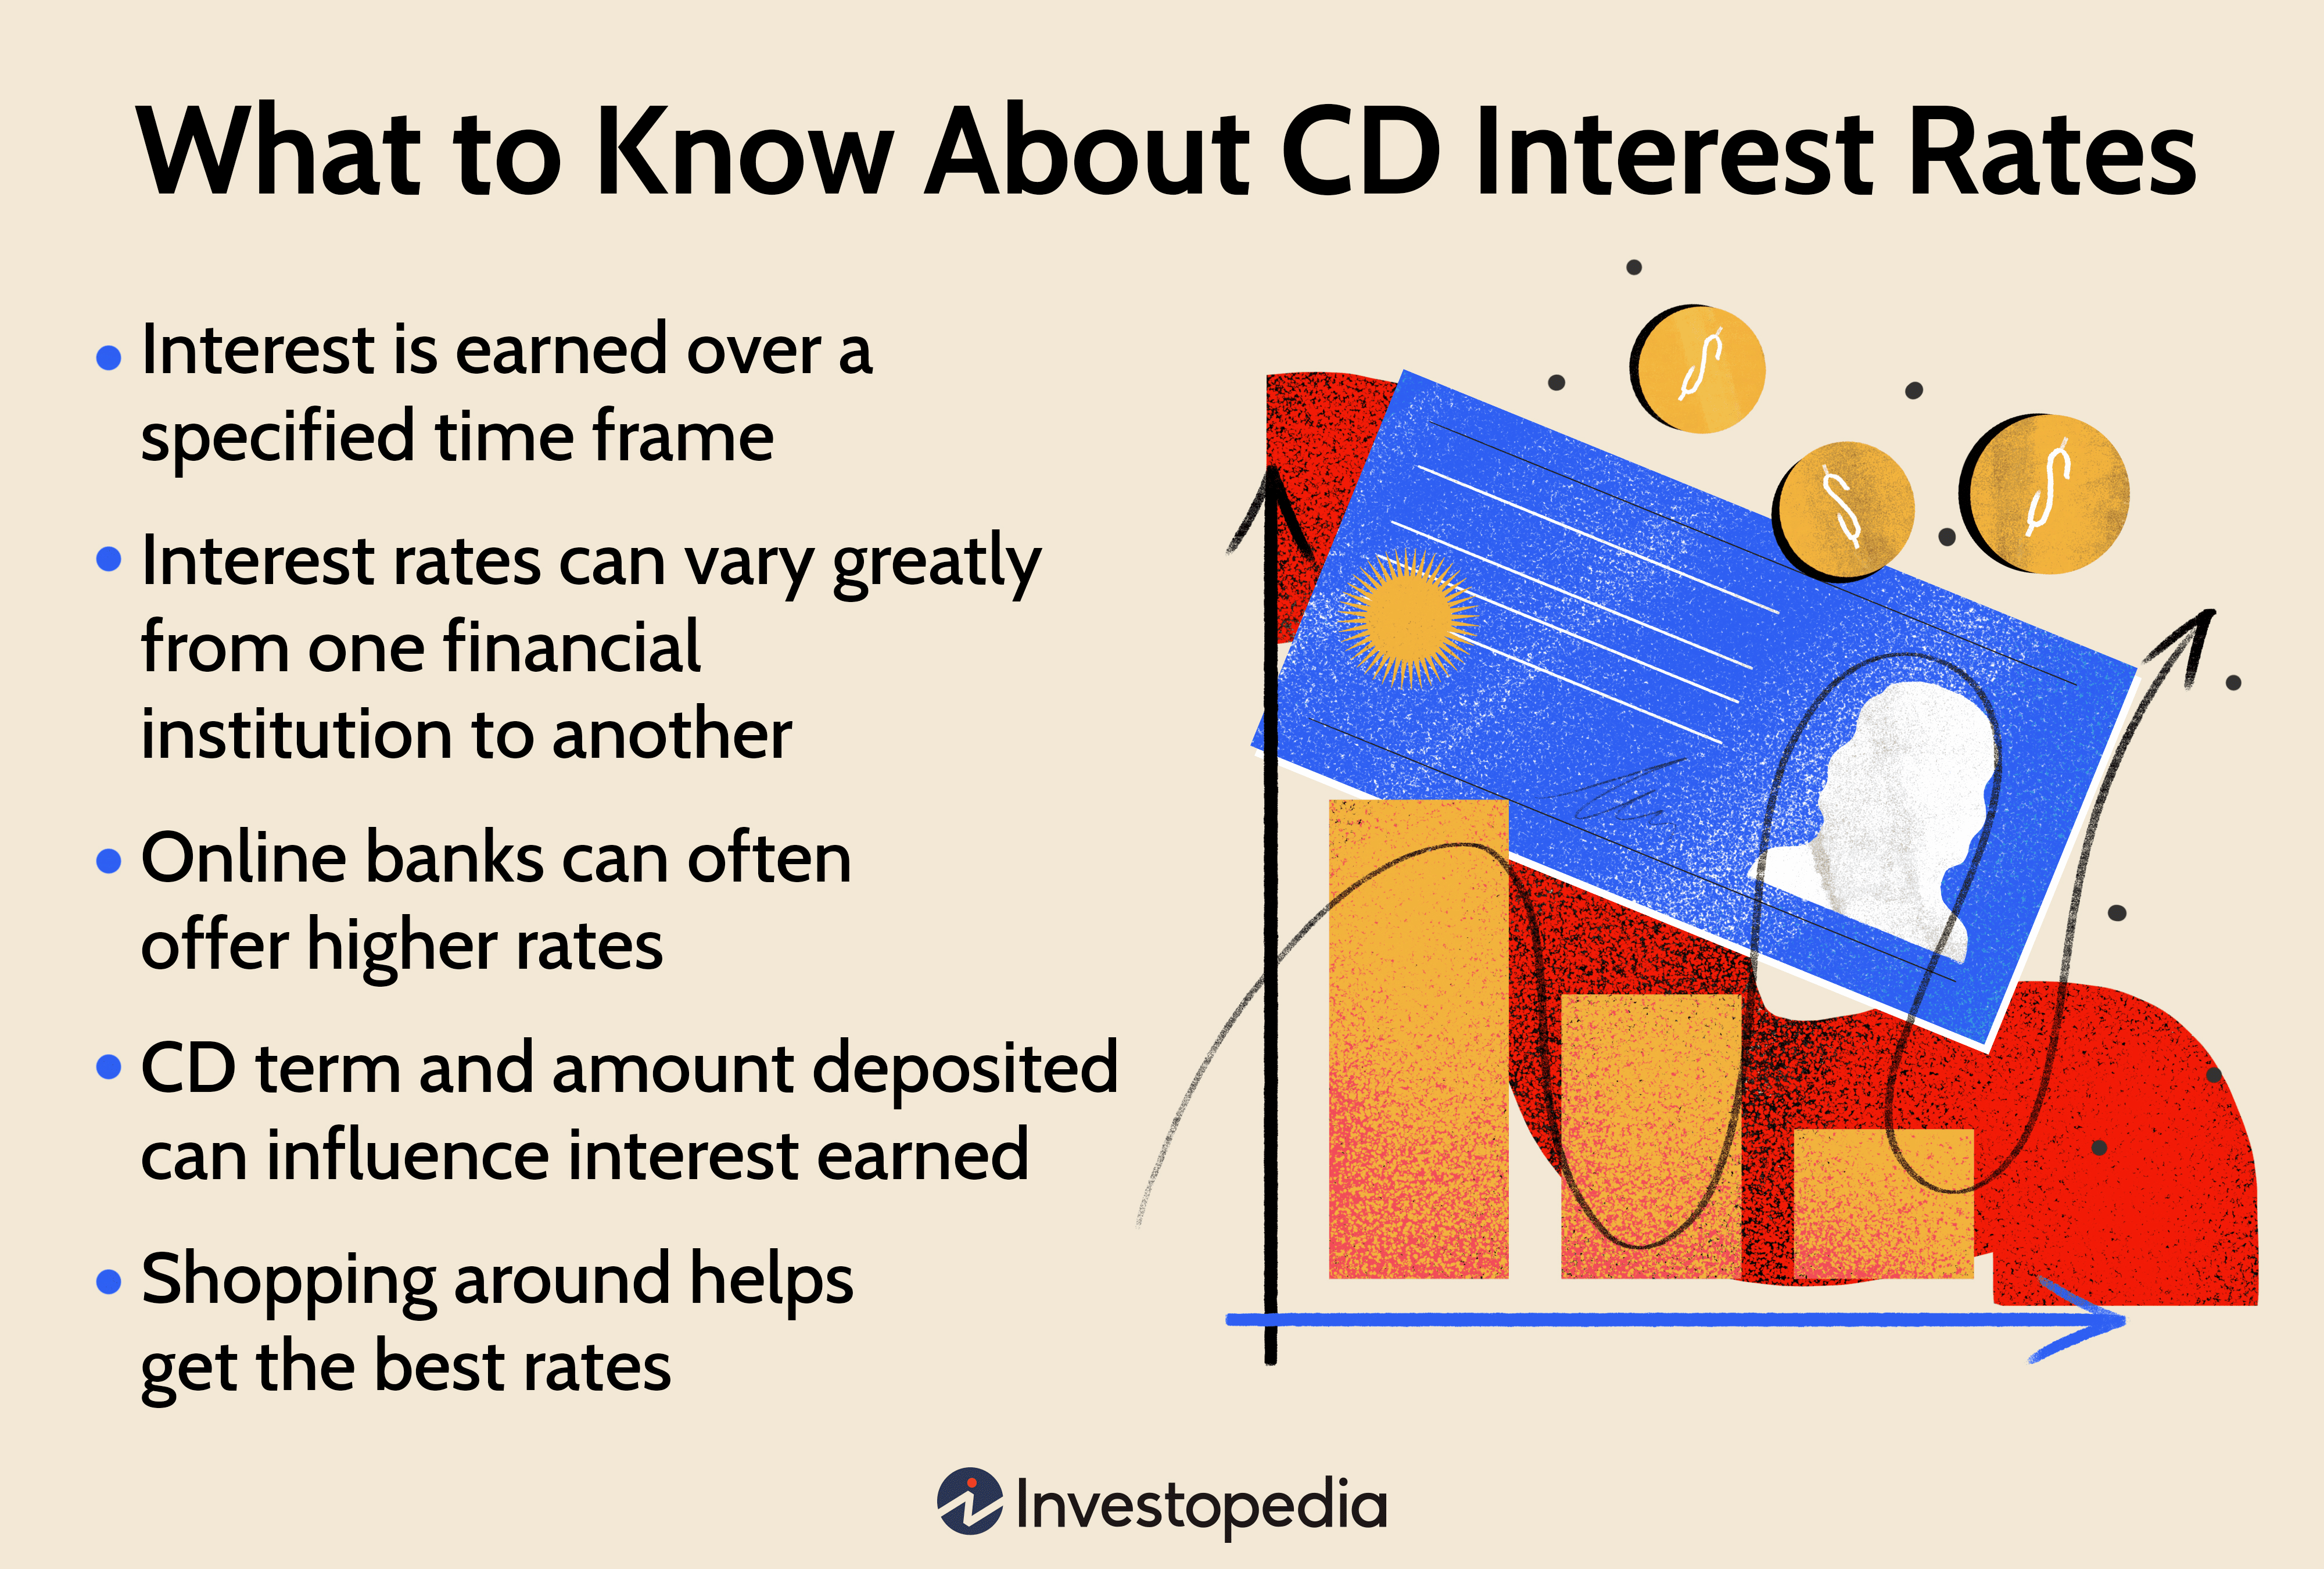 What to Know About CD Interest Rates